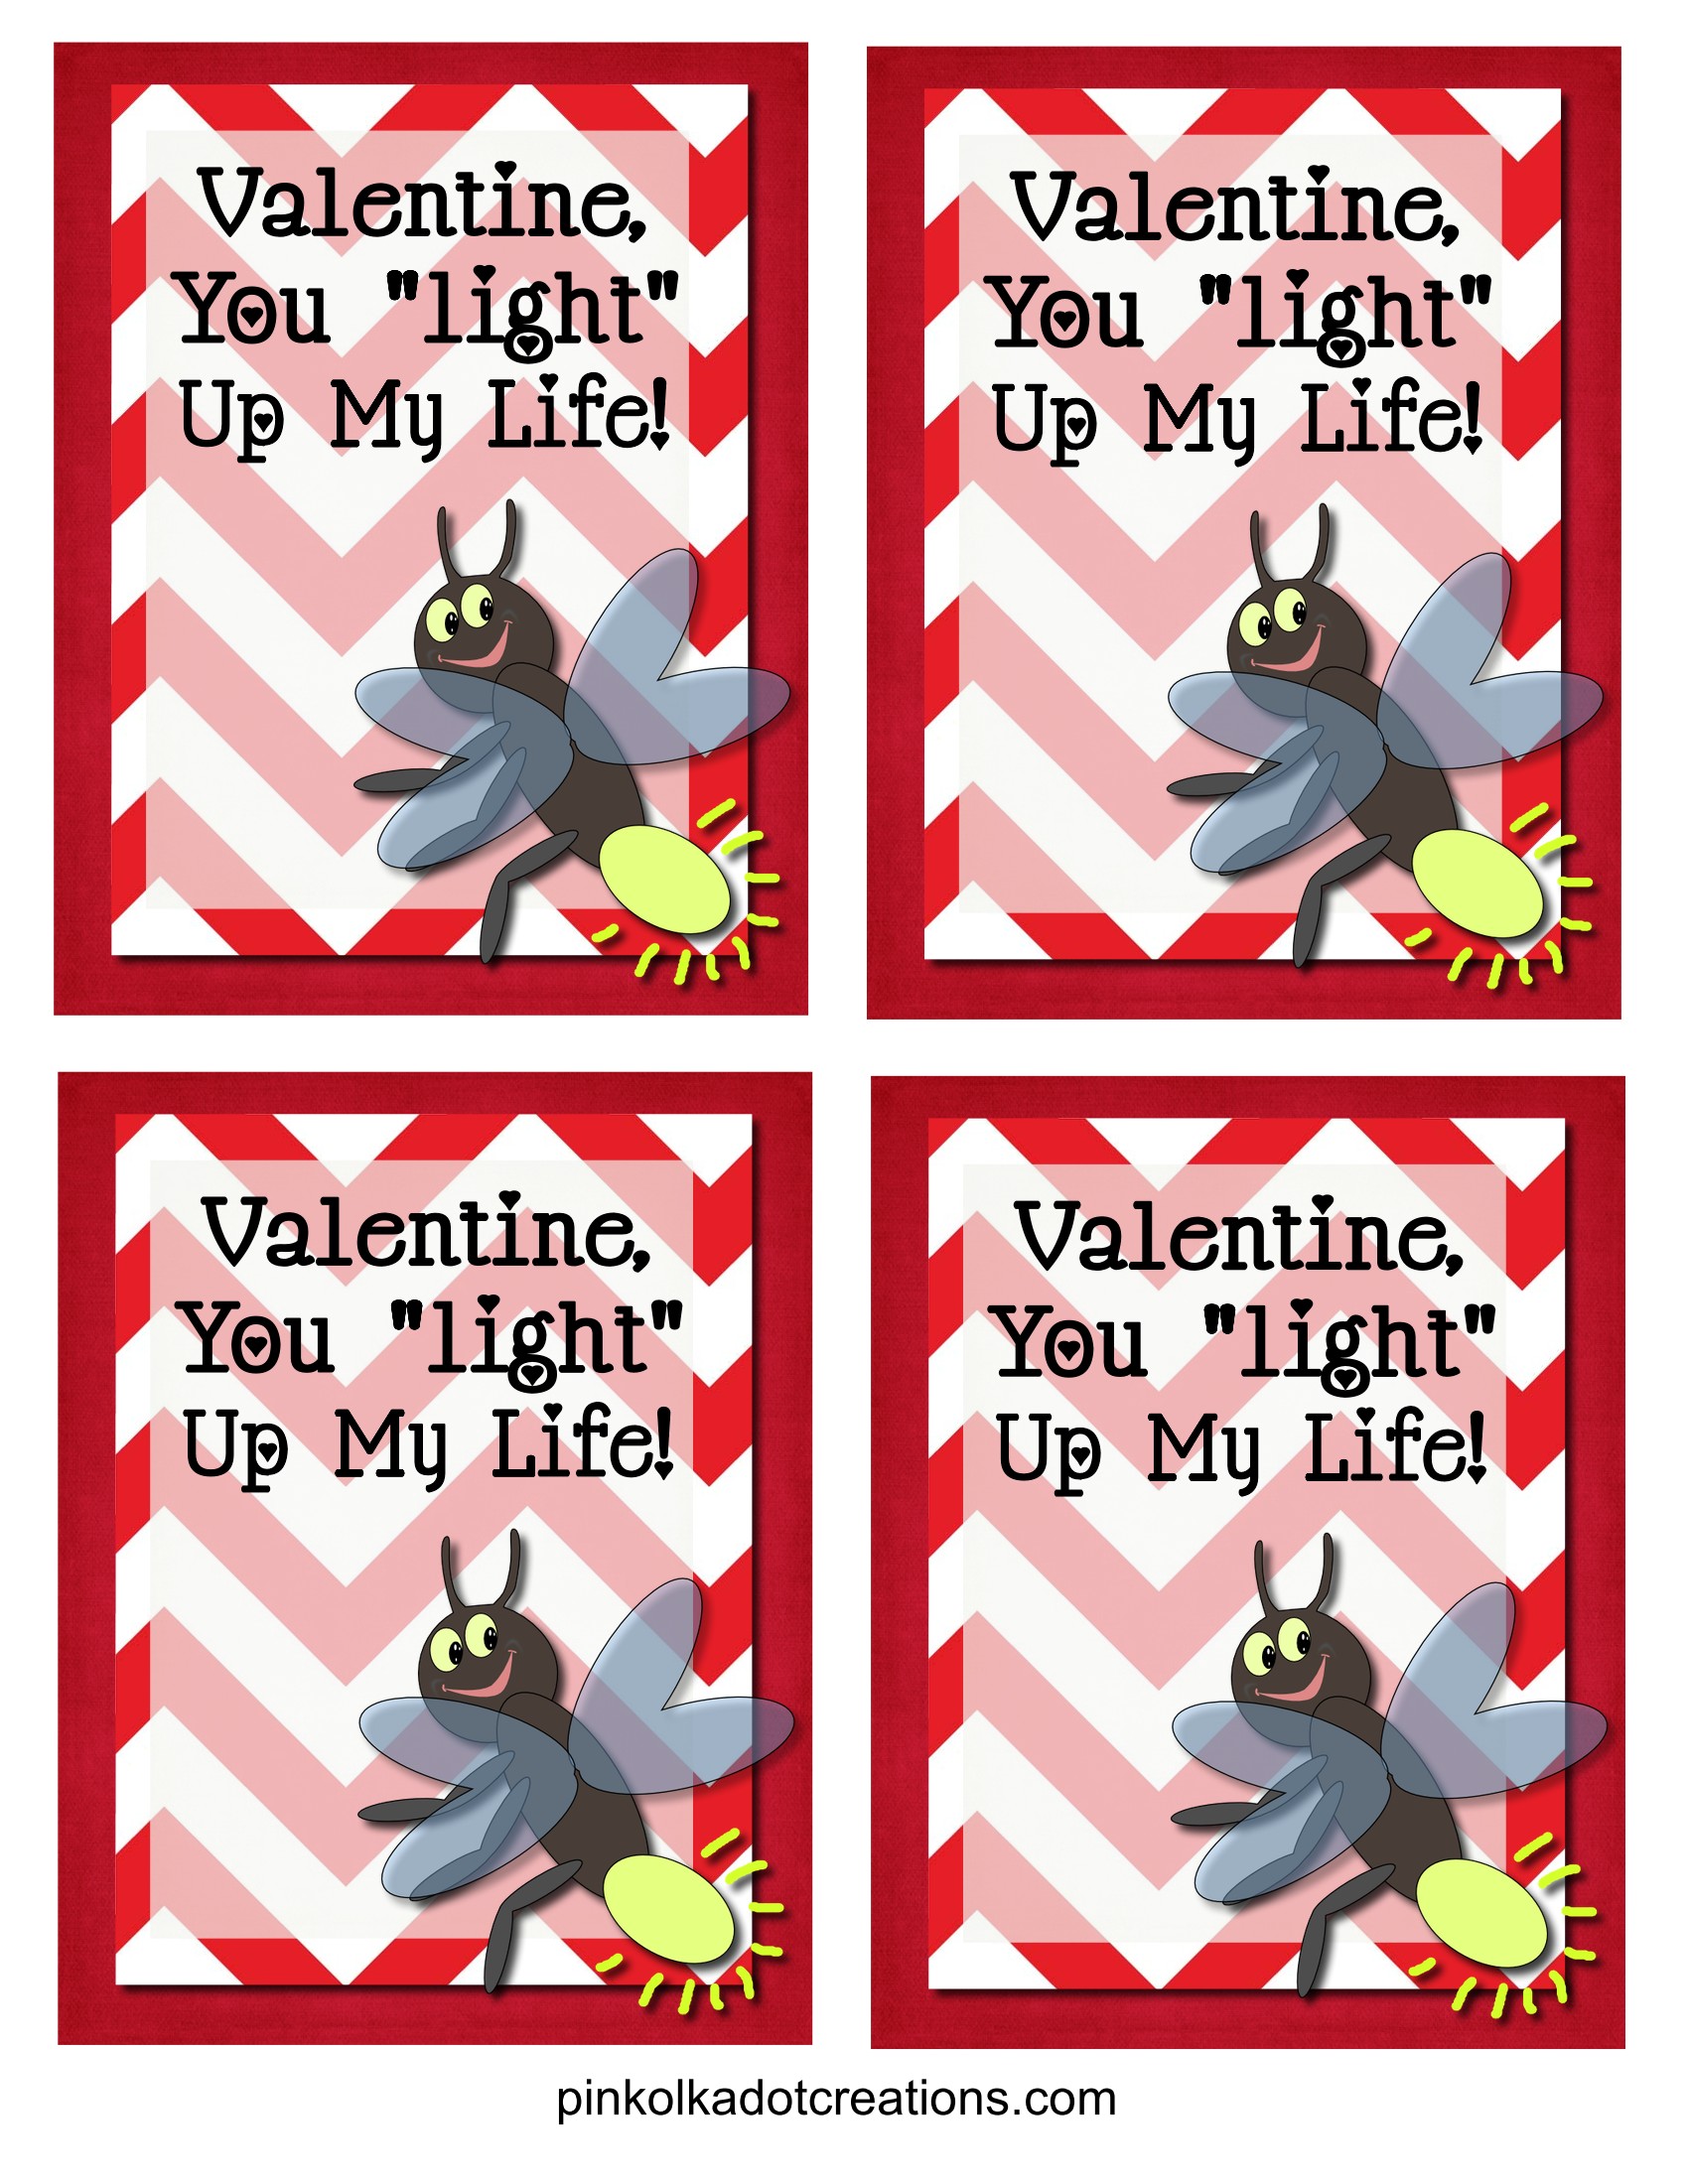 you-light-up-my-life-valentine-archives-pink-polka-dot-creations